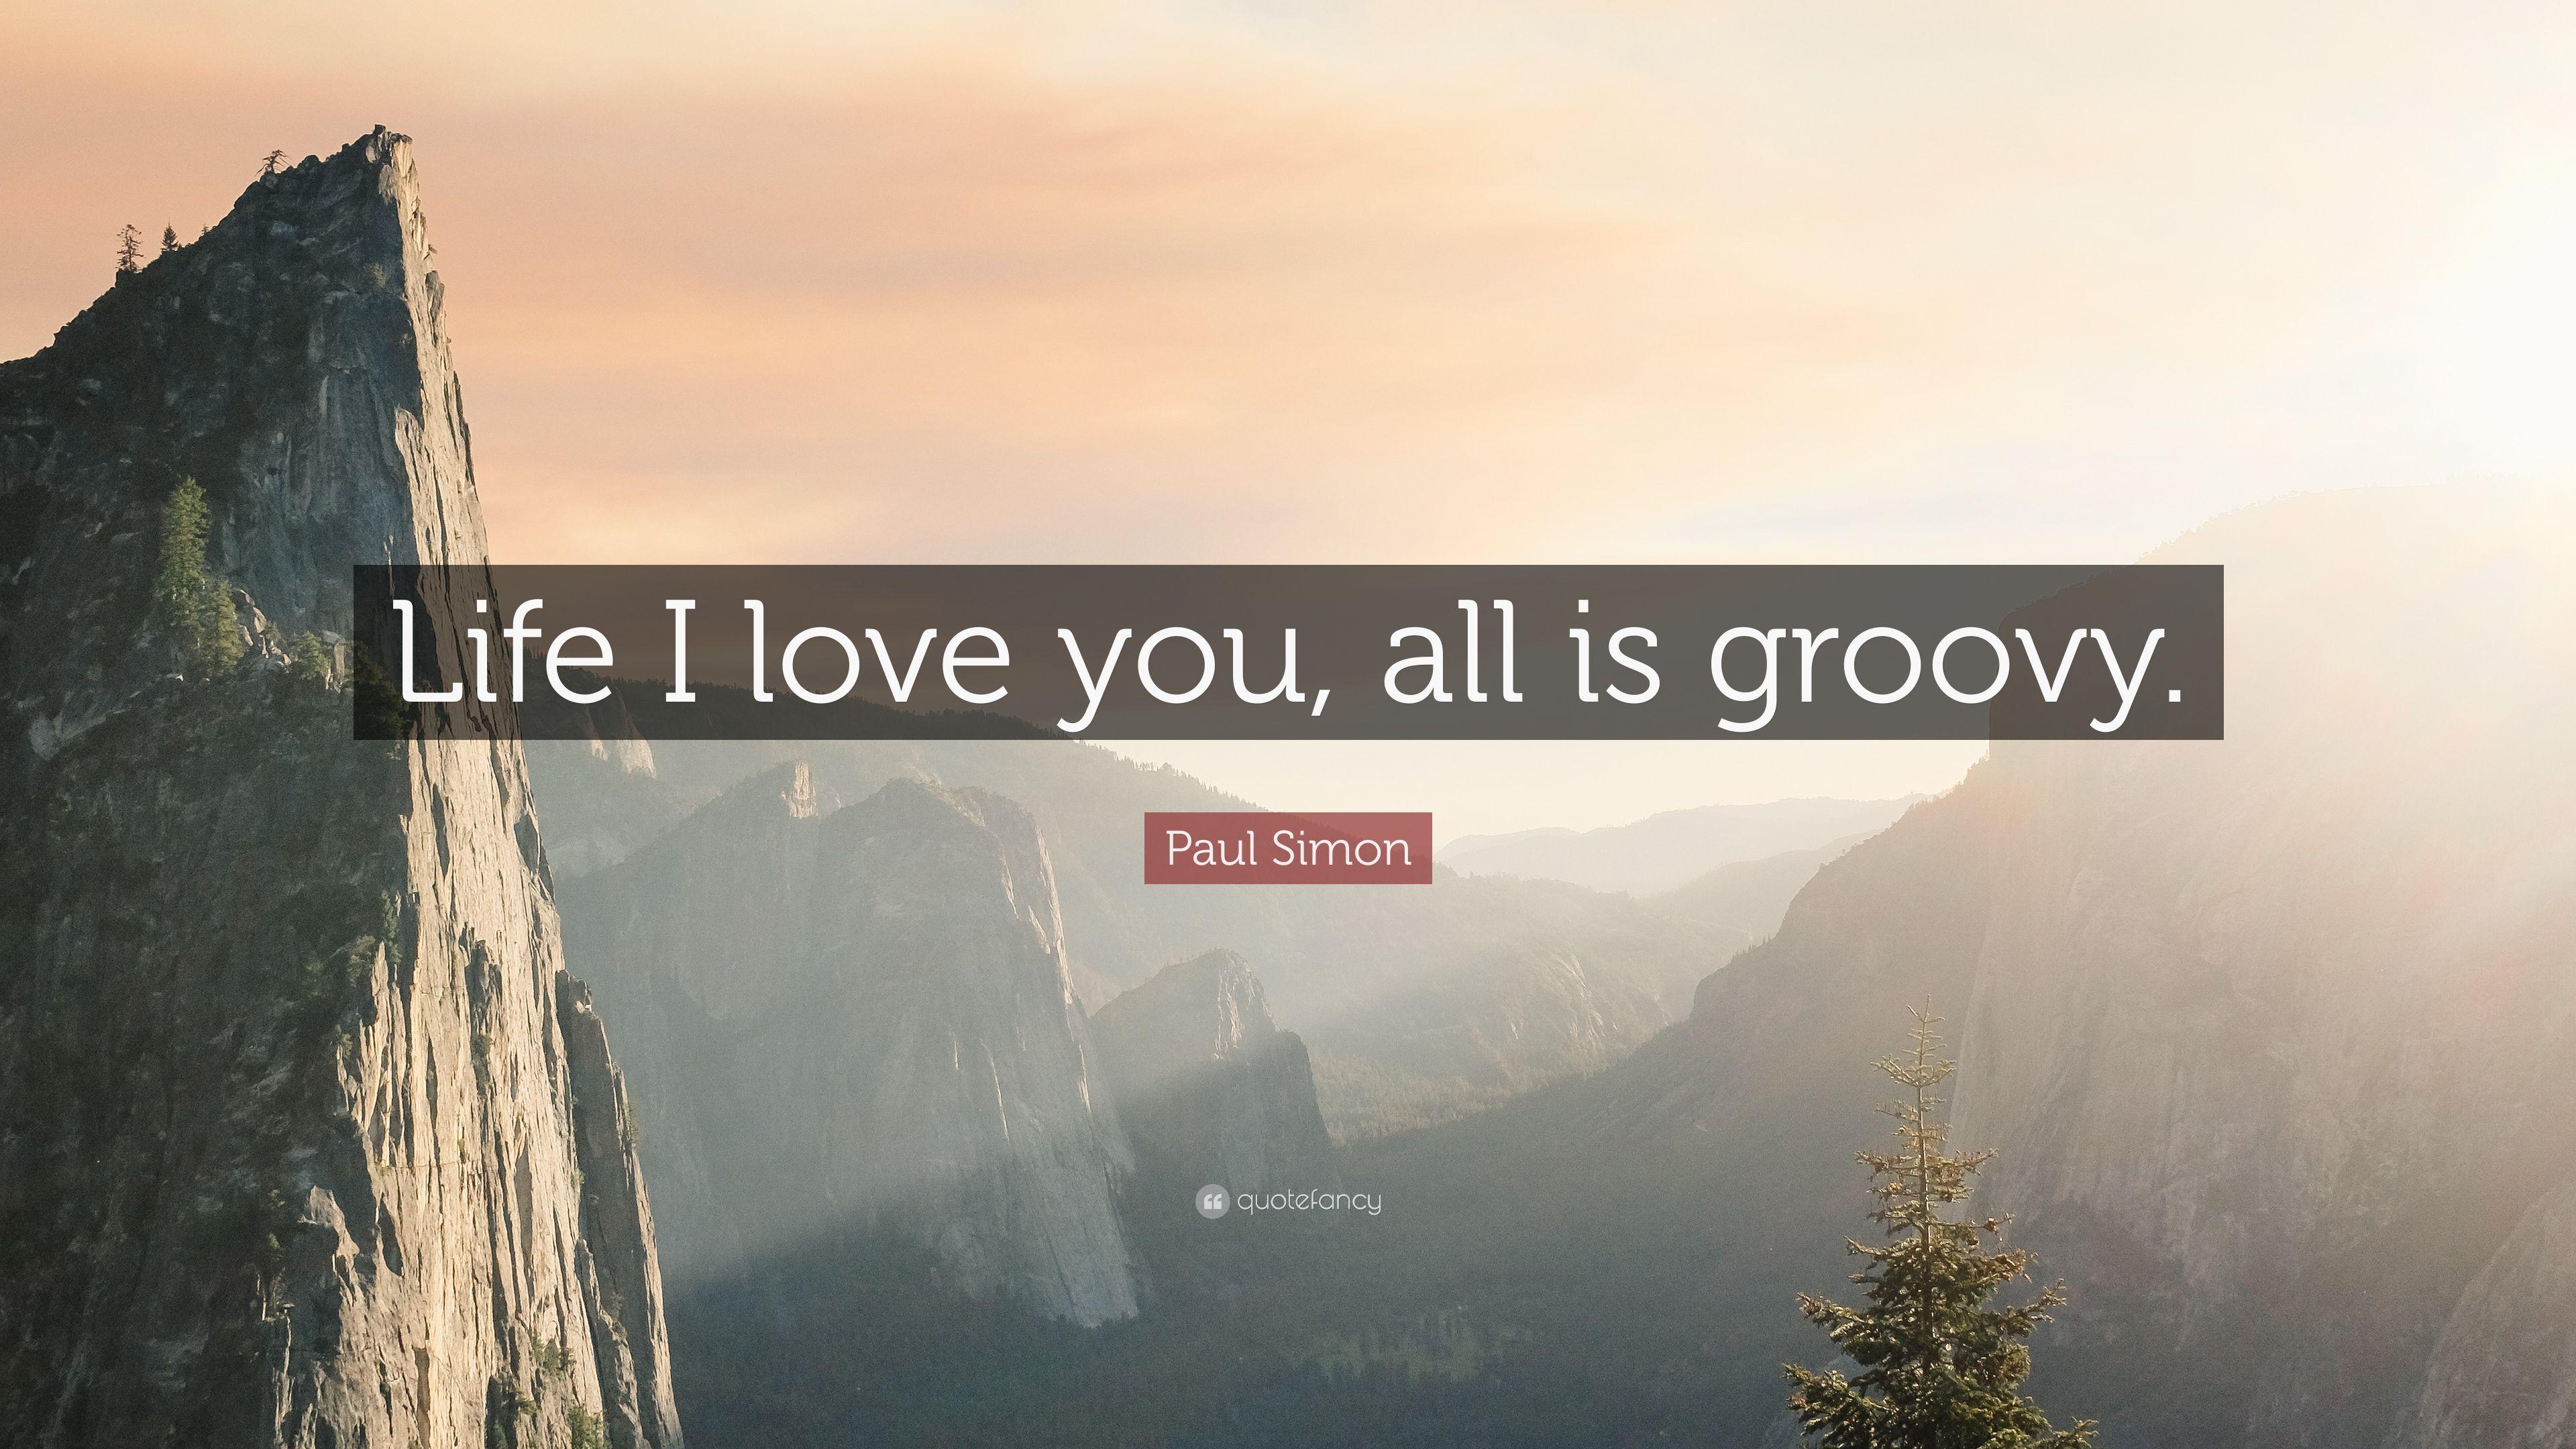 Paul Simon Quote: “Life I love you, all is groovy.” 10 wallpaper